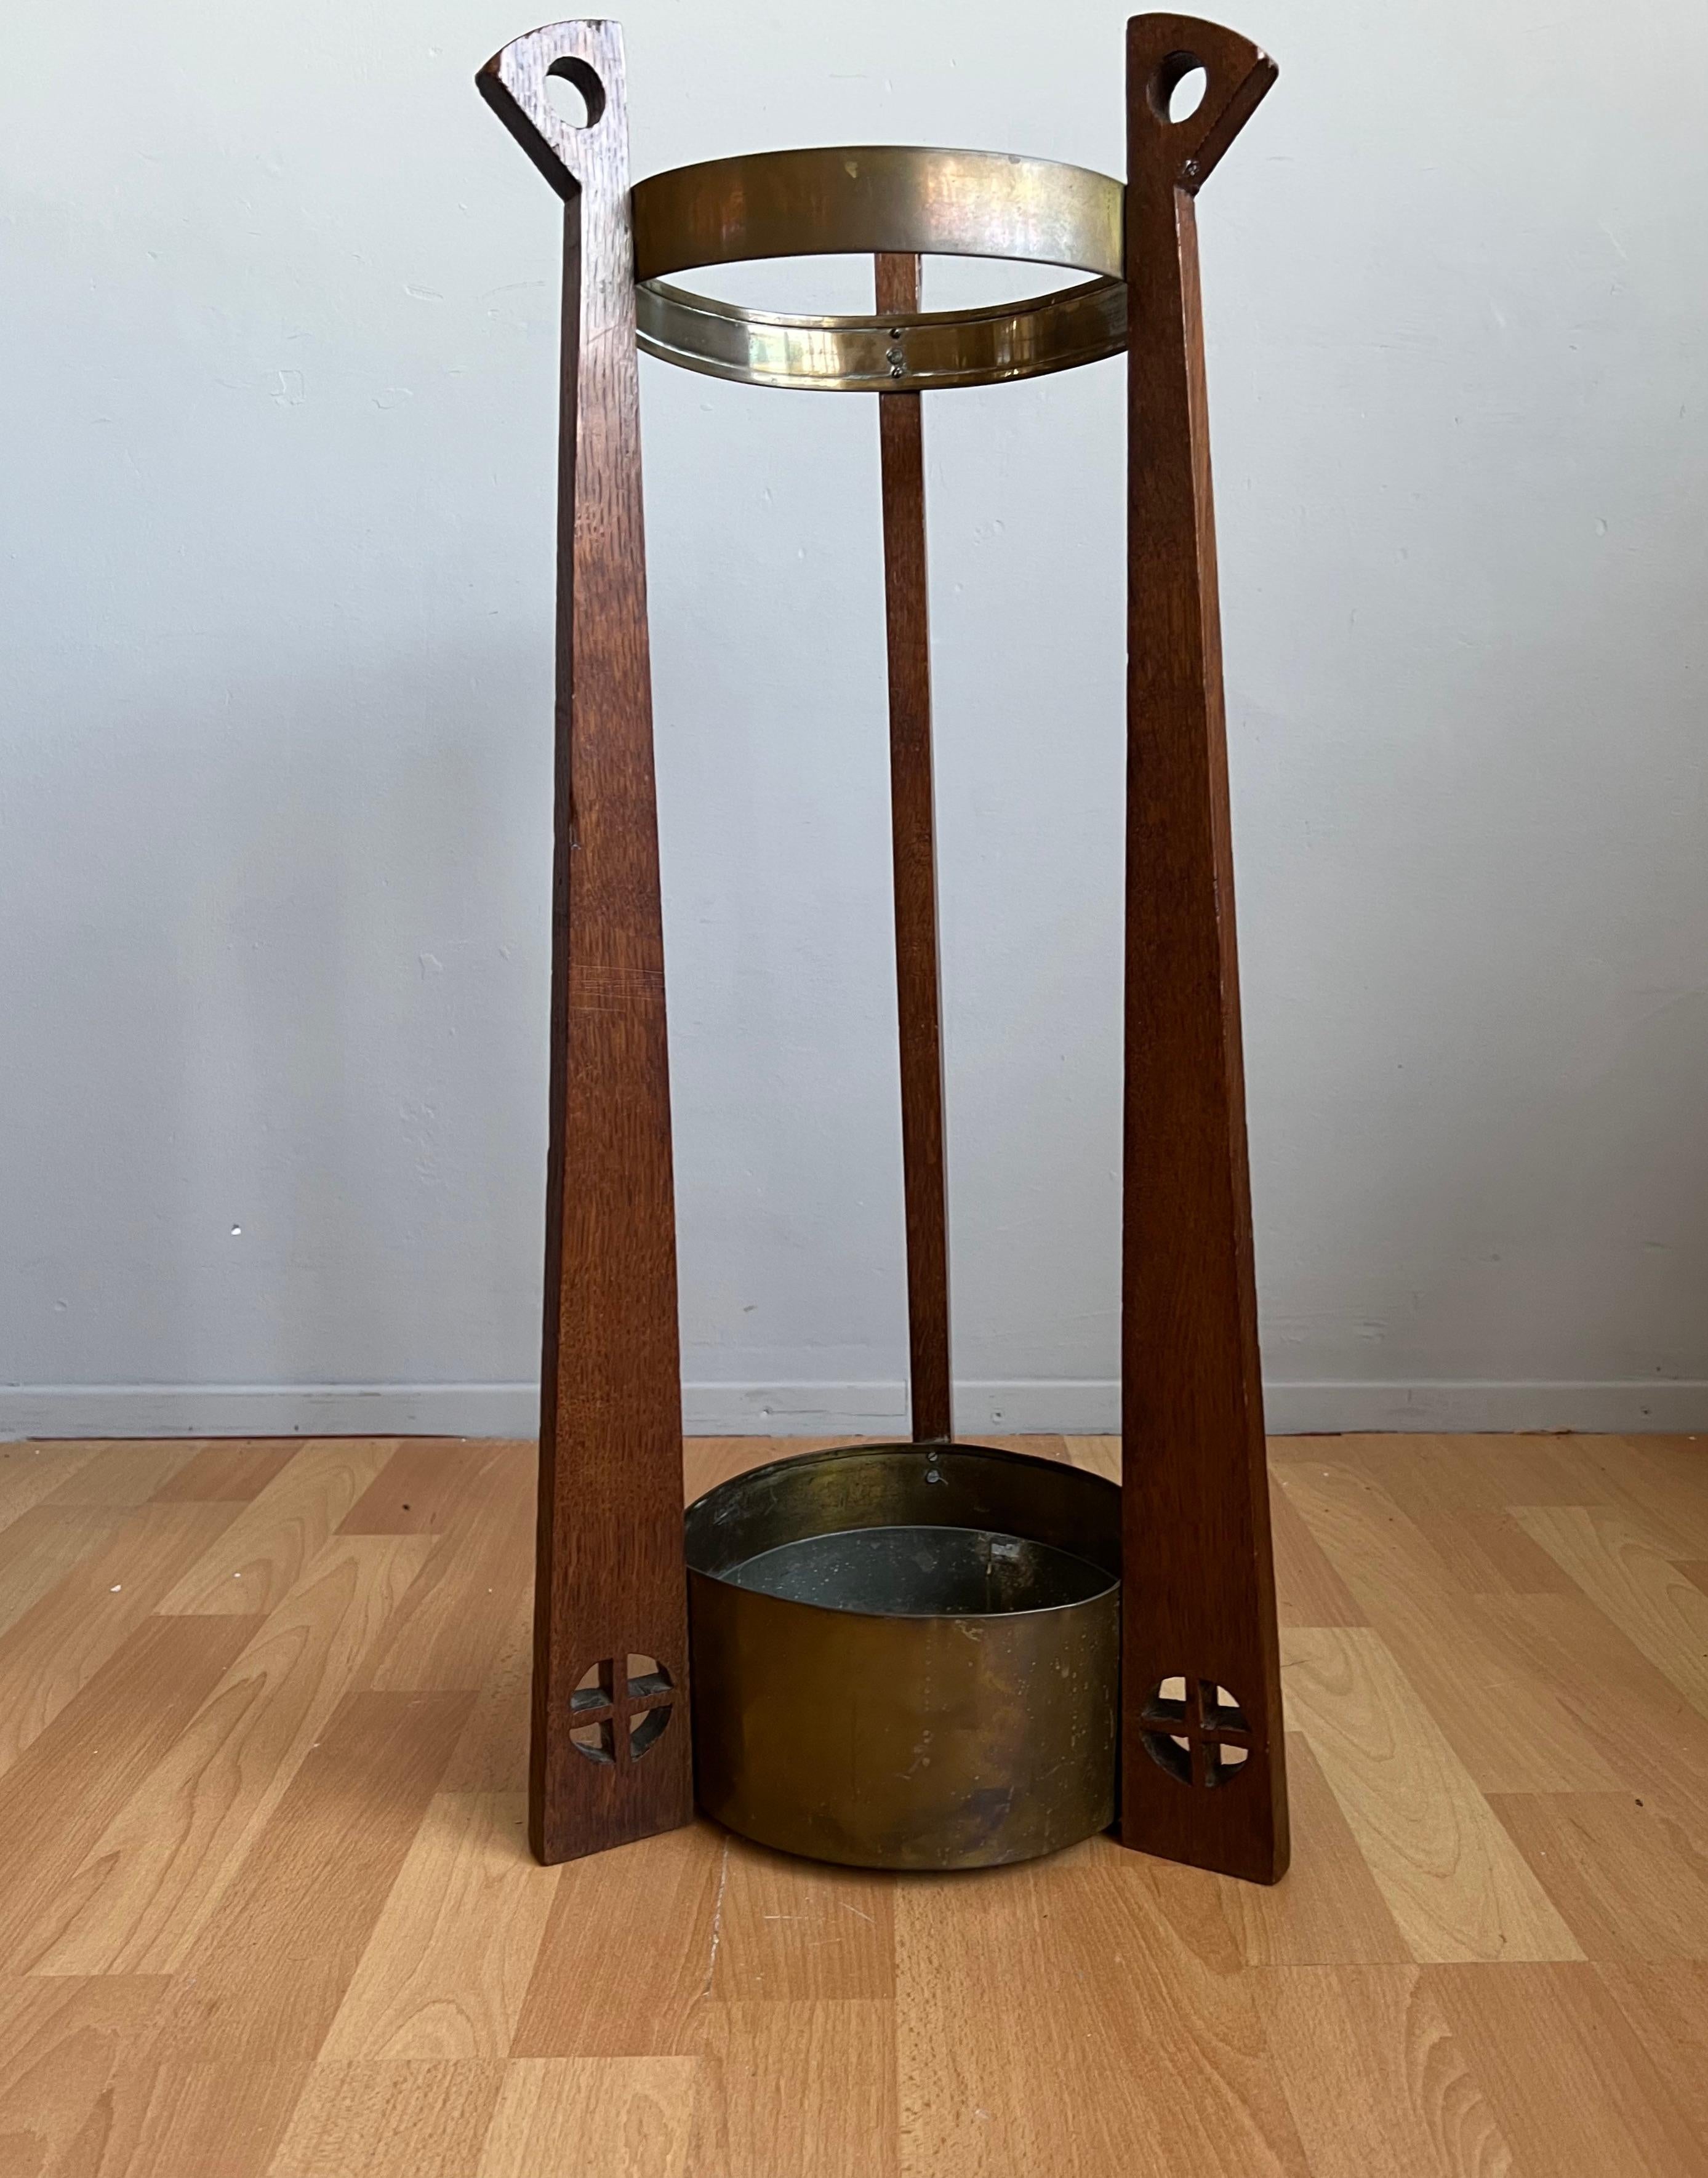 Patinated Gustave Serrurier-Bovy Brass and Oak Cane & Umbrella Stand with Zinc Liner For Sale